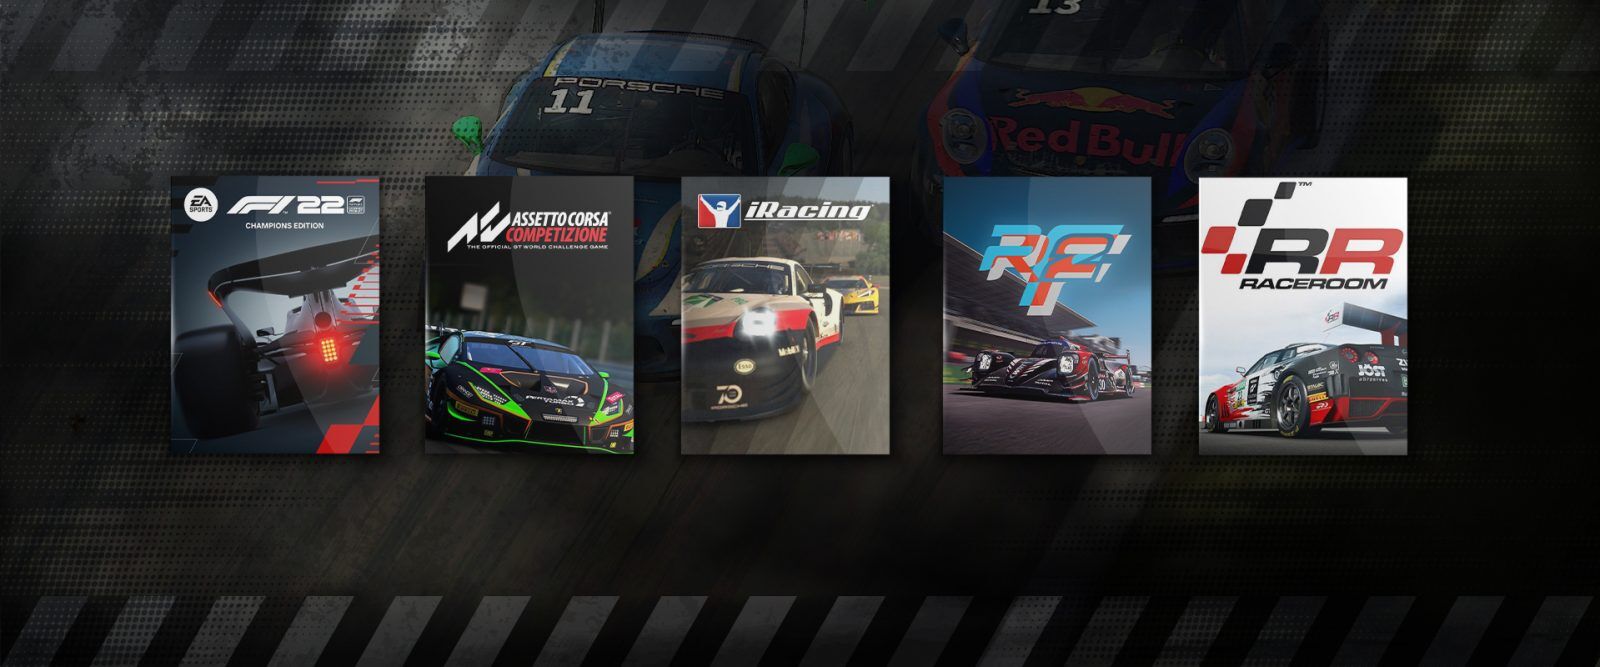 An image of the cover art for F1 22, ACC, iRacing, rFactor 2 and Raceroom.